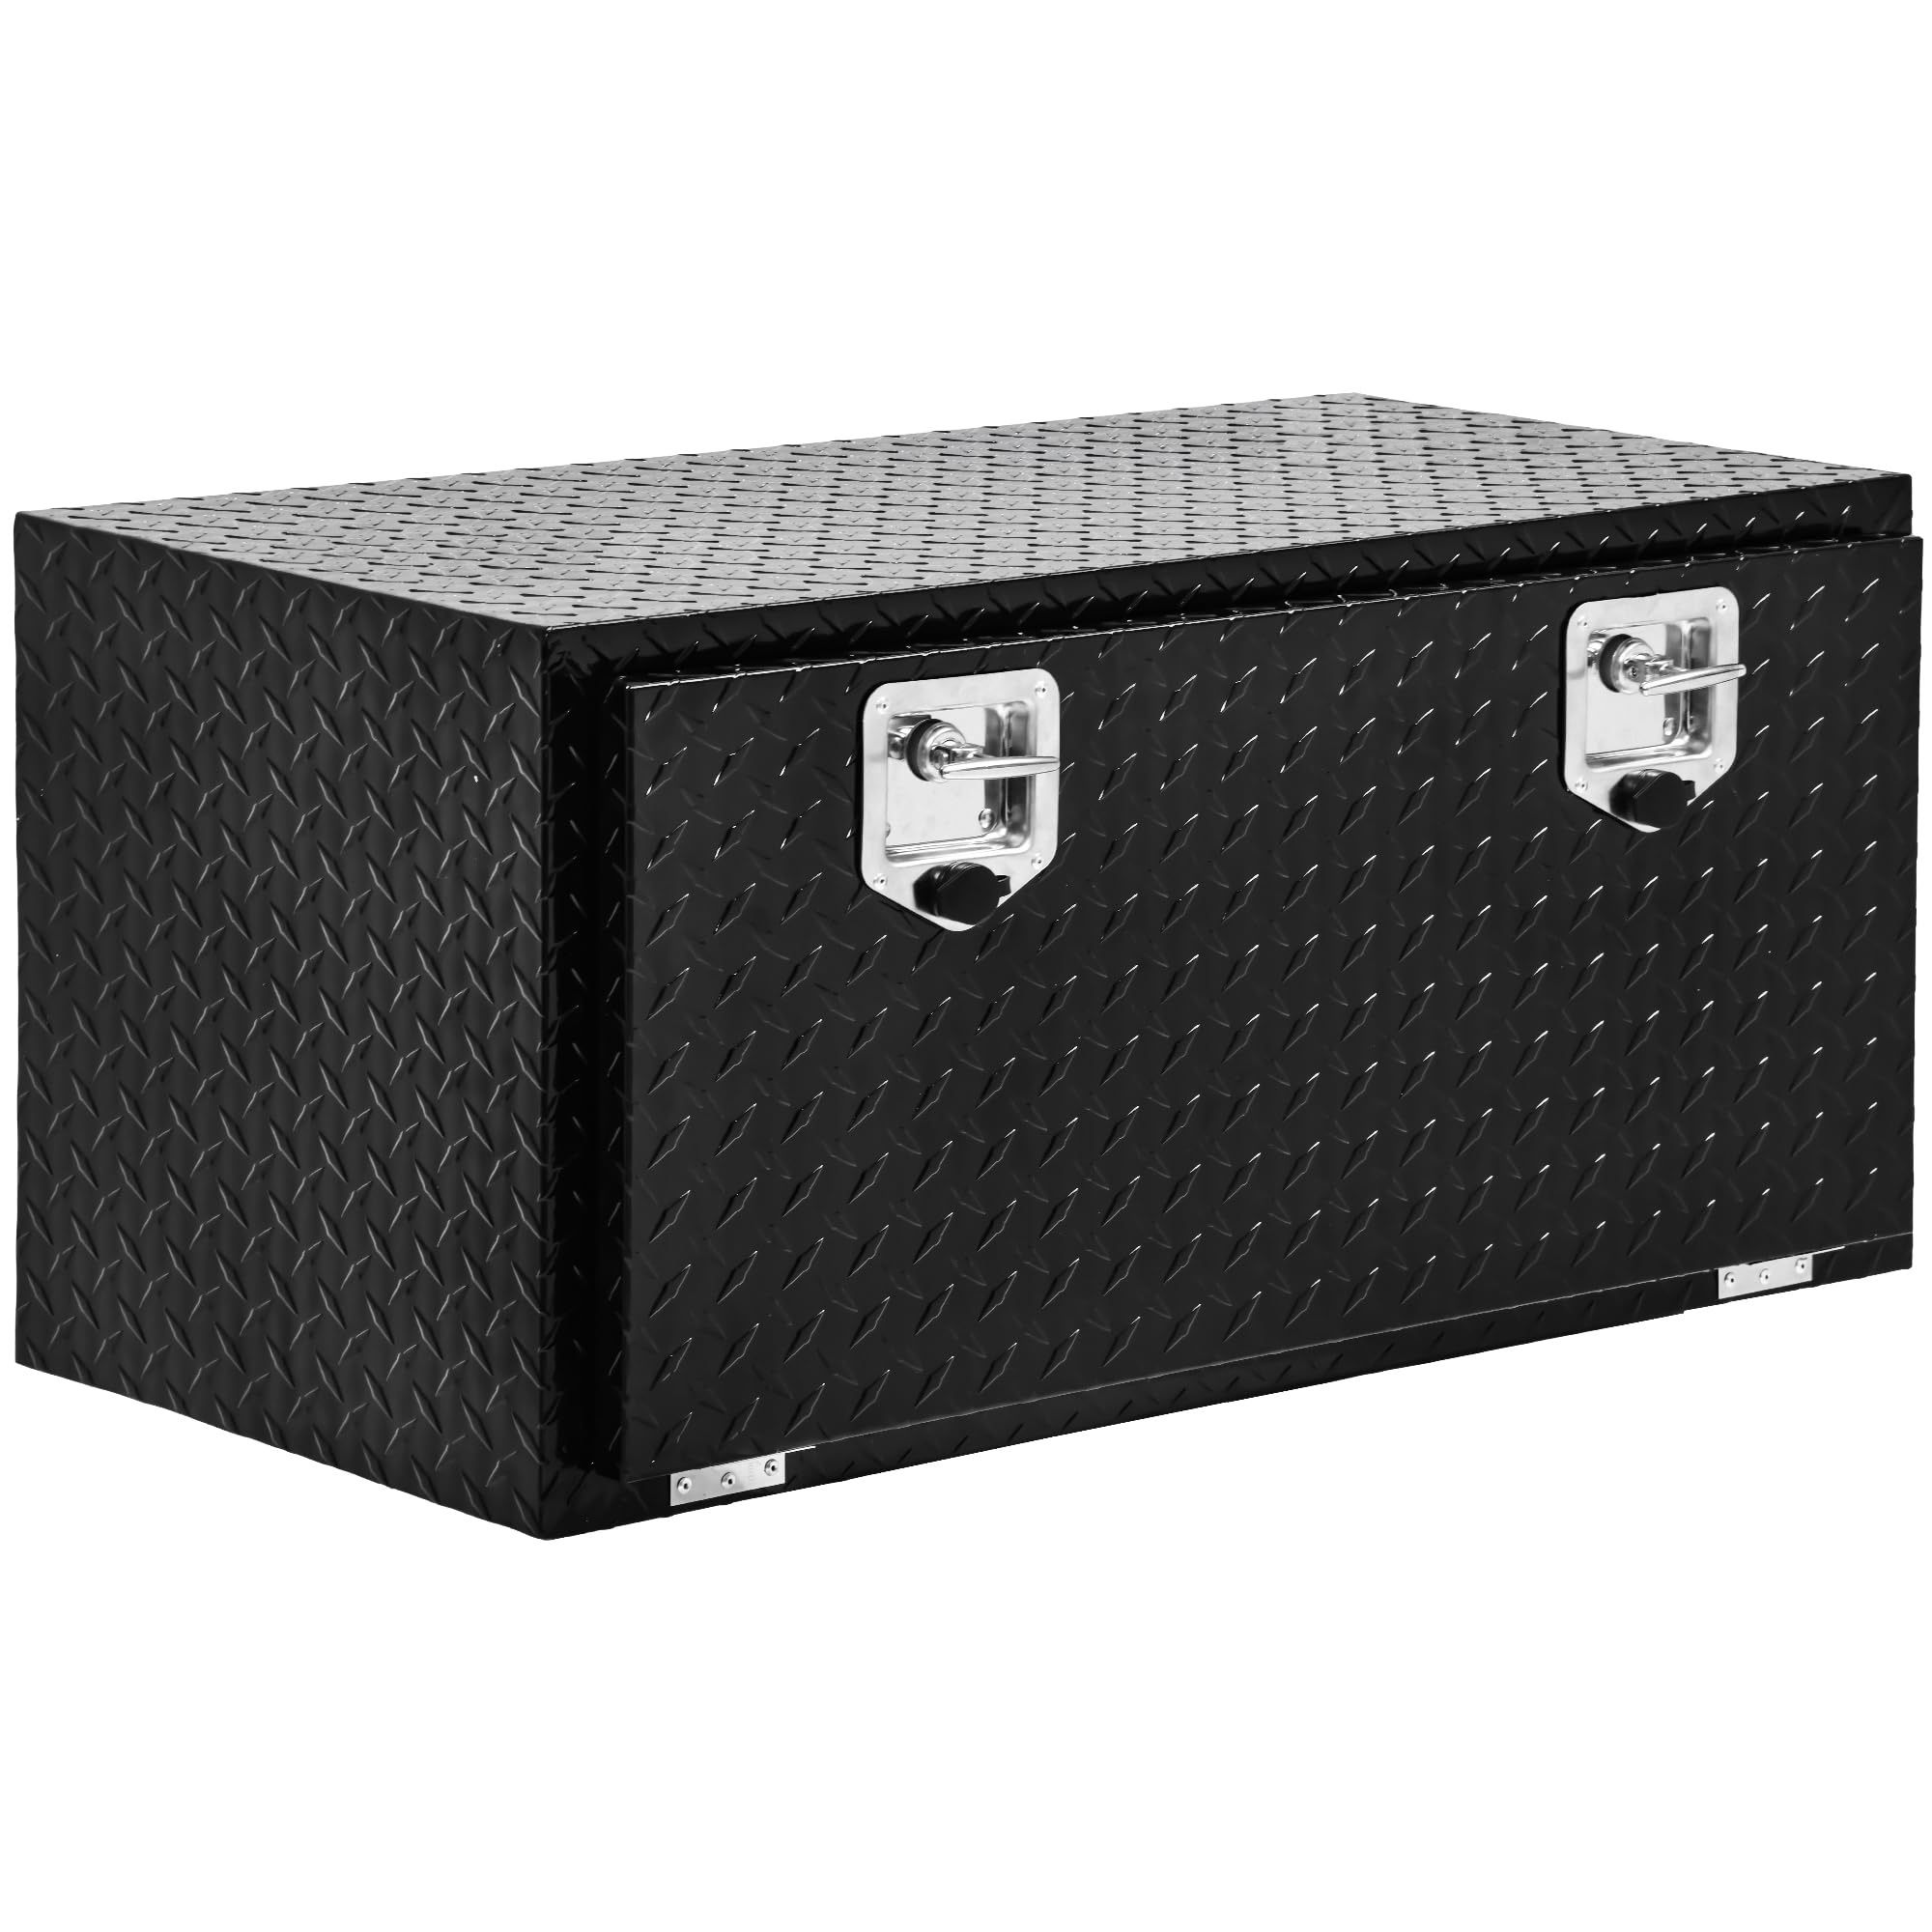 36 Inch Underbody Tool Boxes Heavy Duty Aluminum,Diamond Plate Truck Tool Boxes, Waterproof Chest Storage Organizer for Pick Up Truck Bed, RV Trailer 